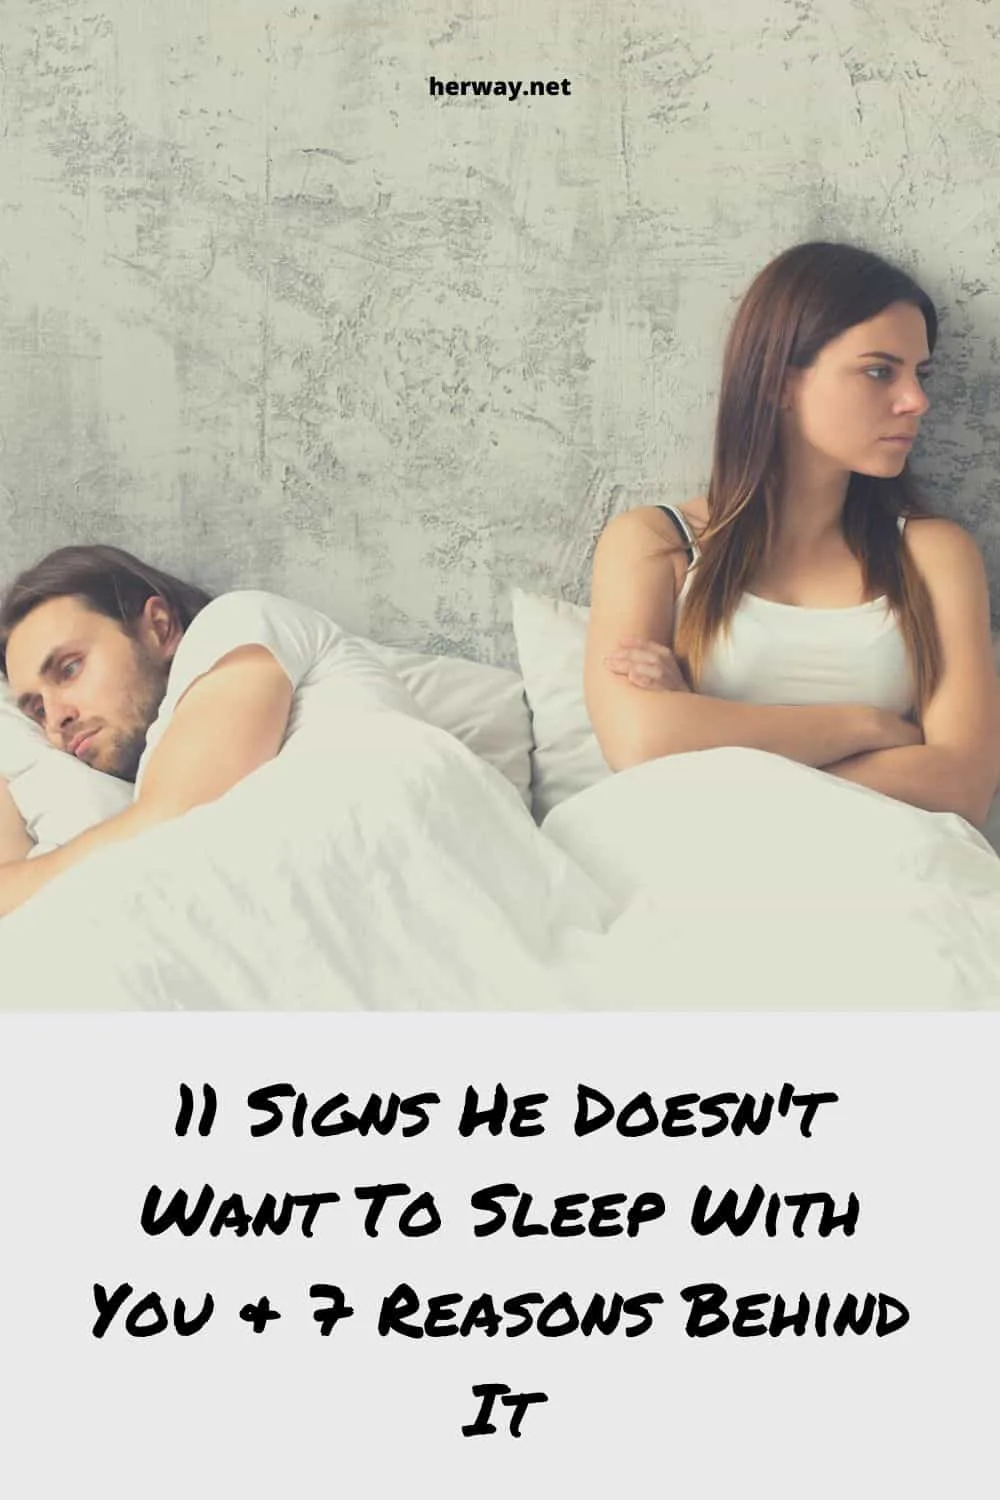 11 Signs He Doesn't Want To Sleep With You & 7 Reasons Behind It